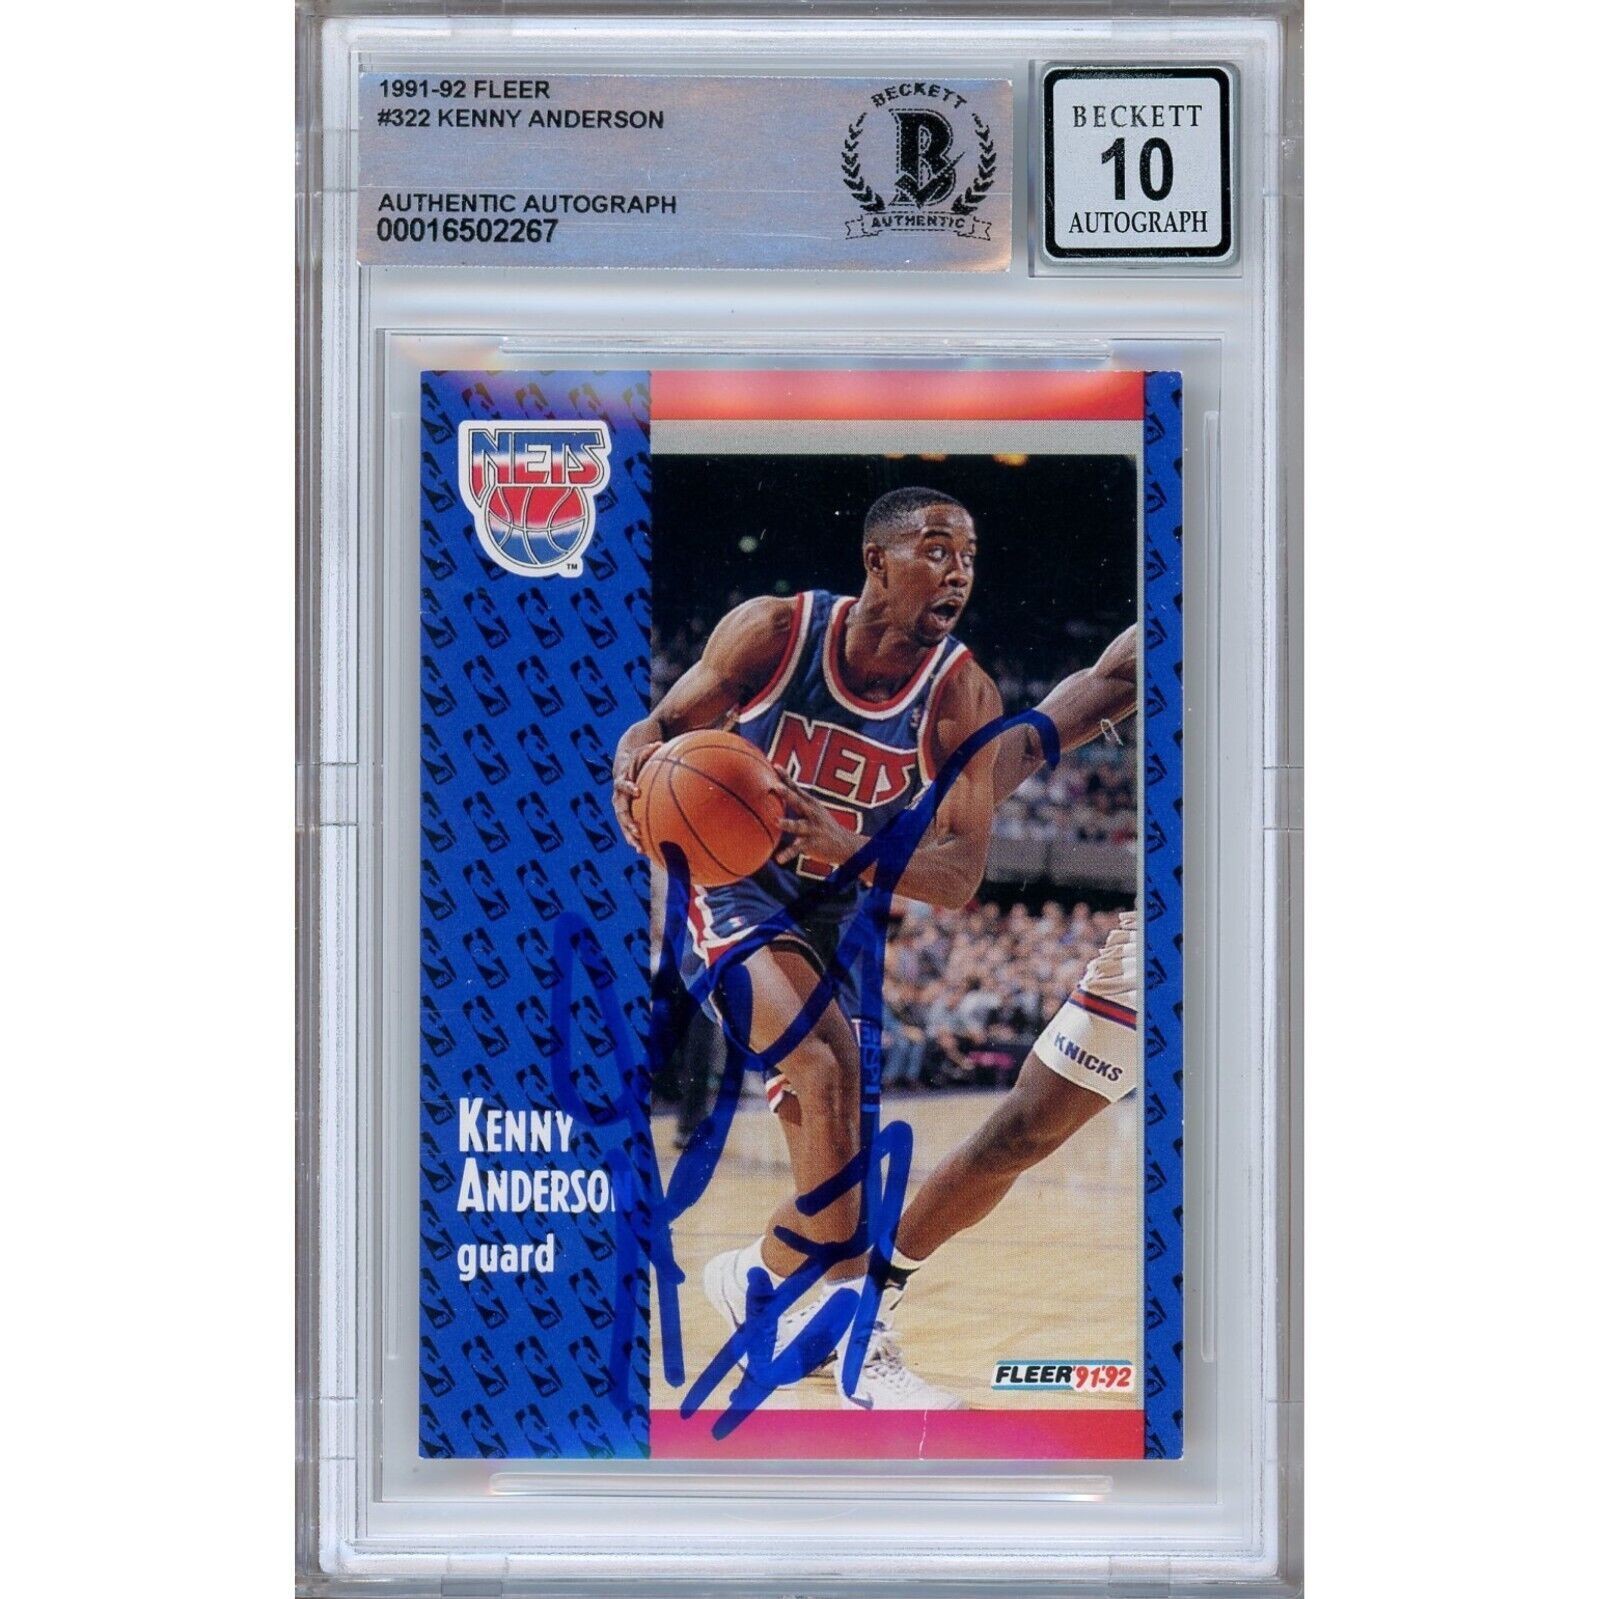 Primary image for Kenny Anderson New Jersey Nets Auto 1991 Fleer Basketball Autograph Card Beckett